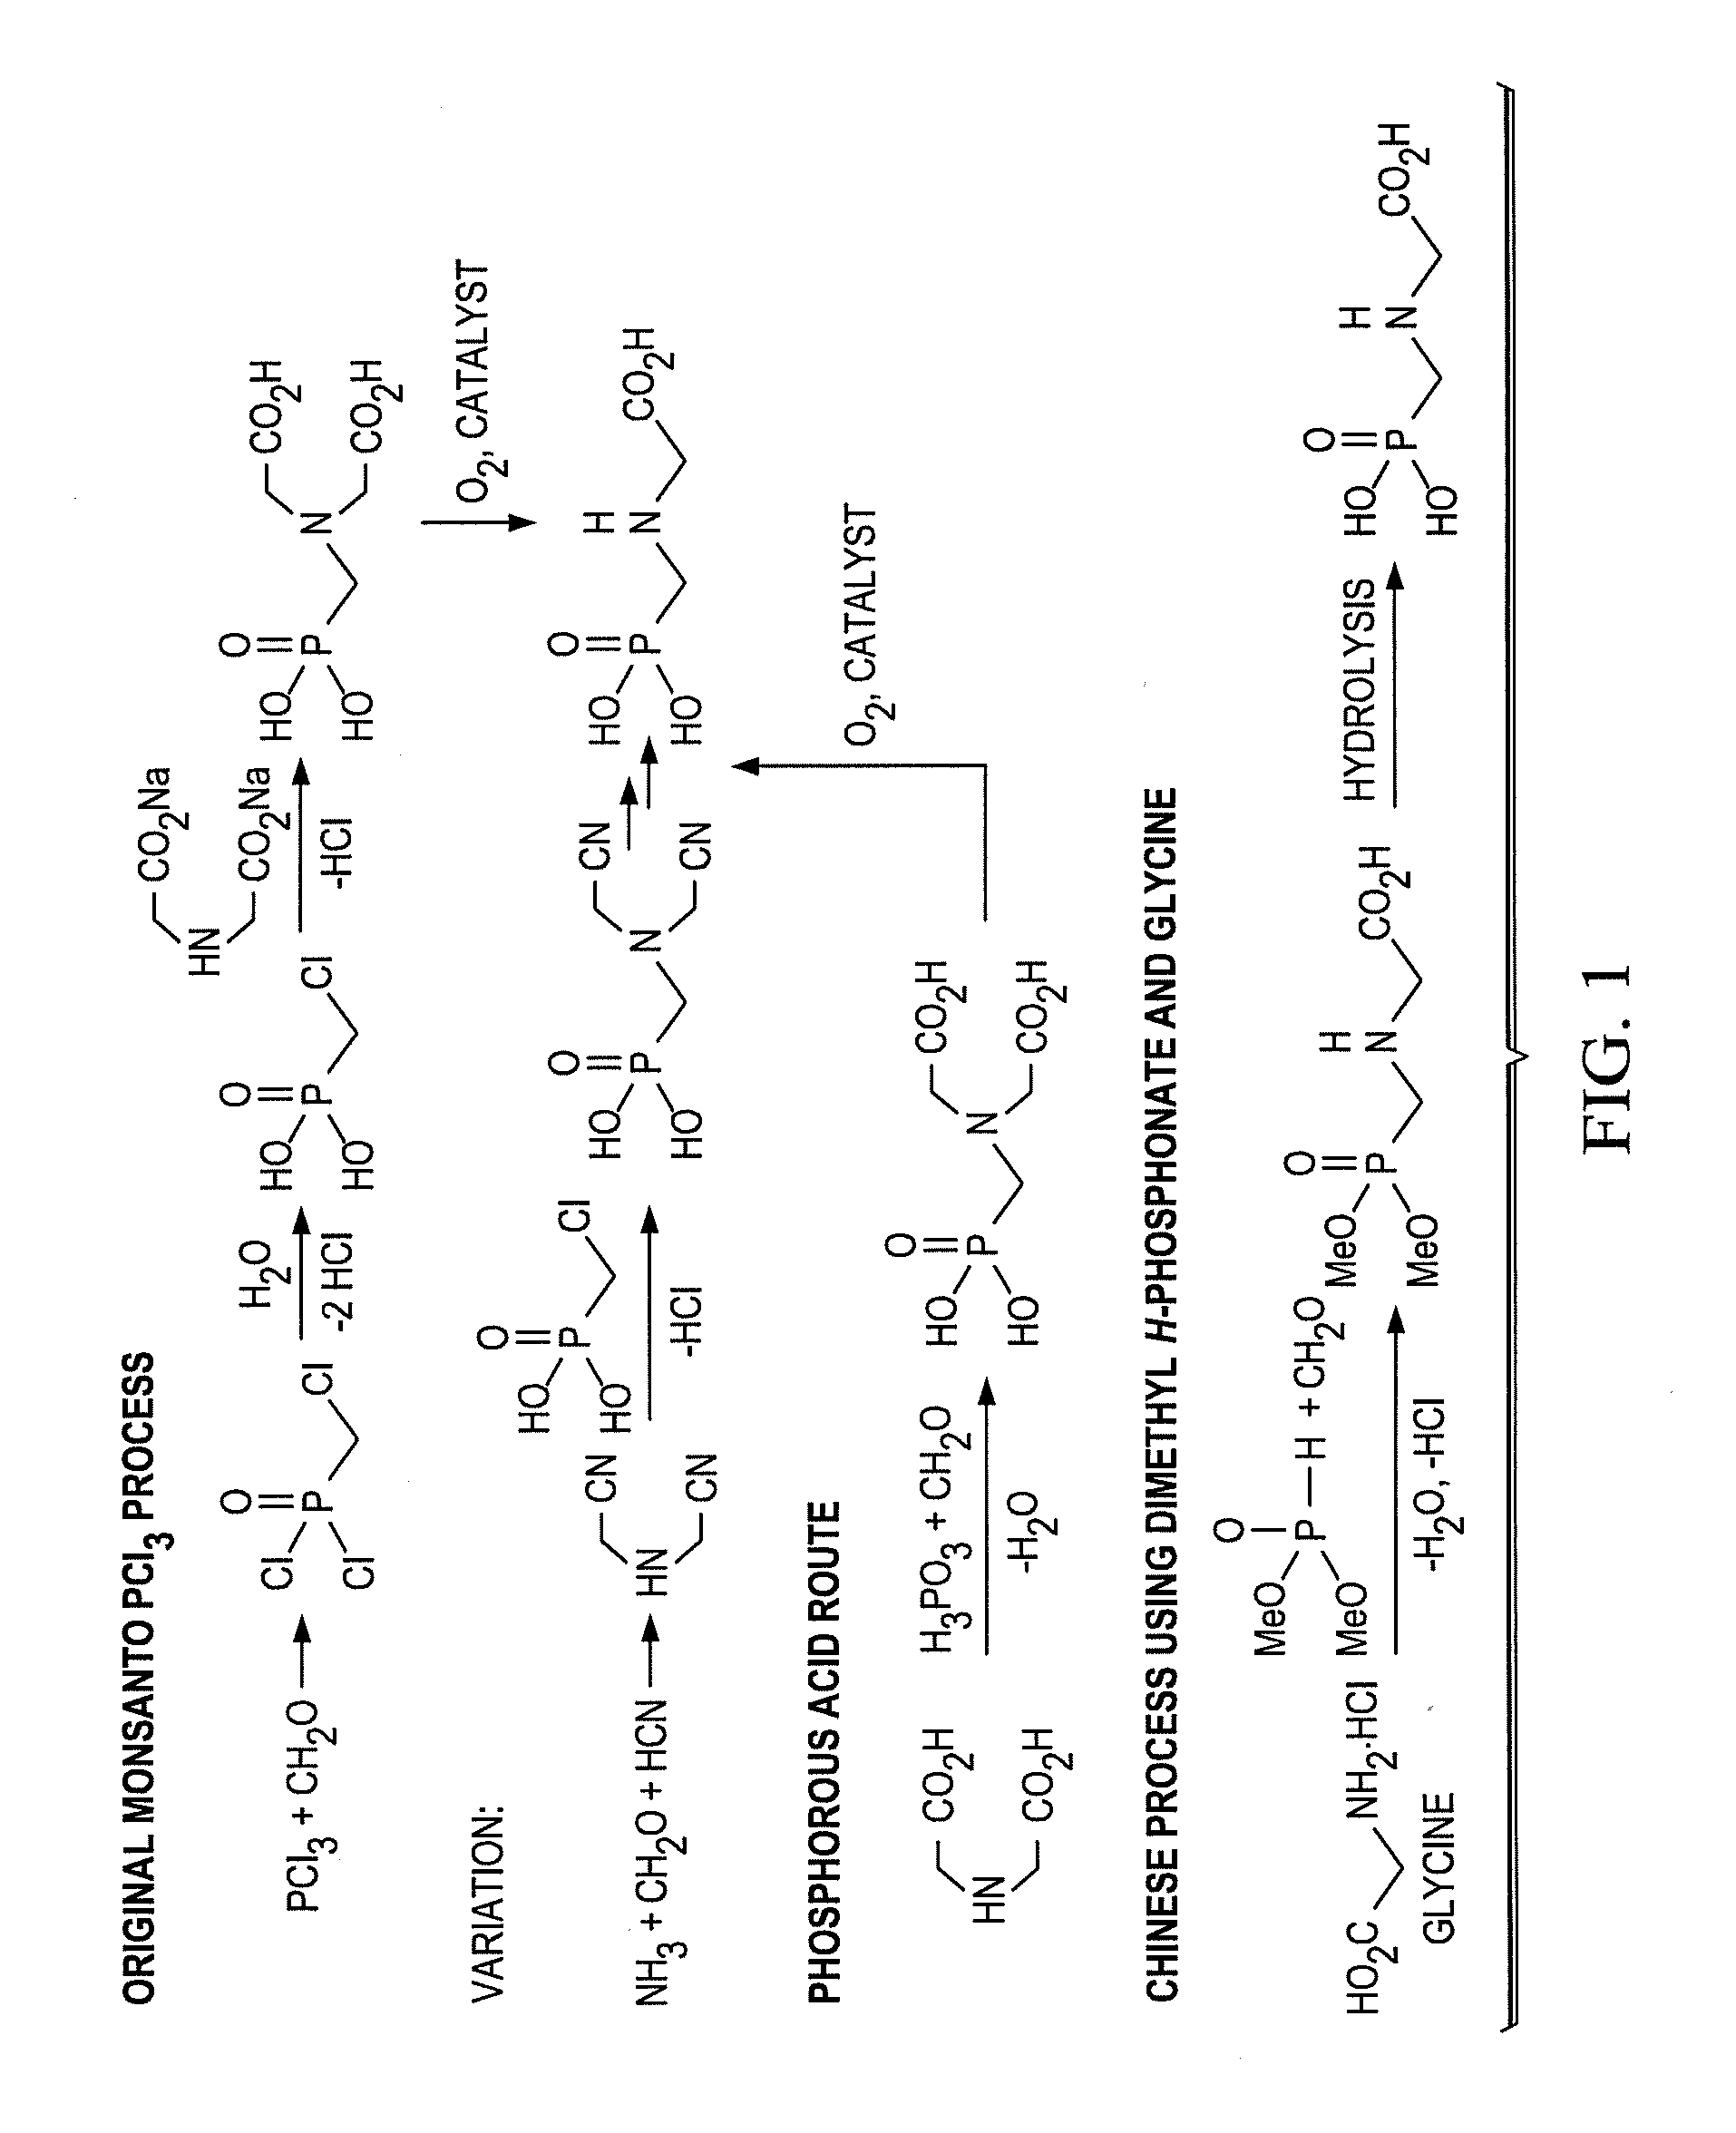 Synthesis of H-phosphonate intermediates and their use in preparing the herbicide glyphosate